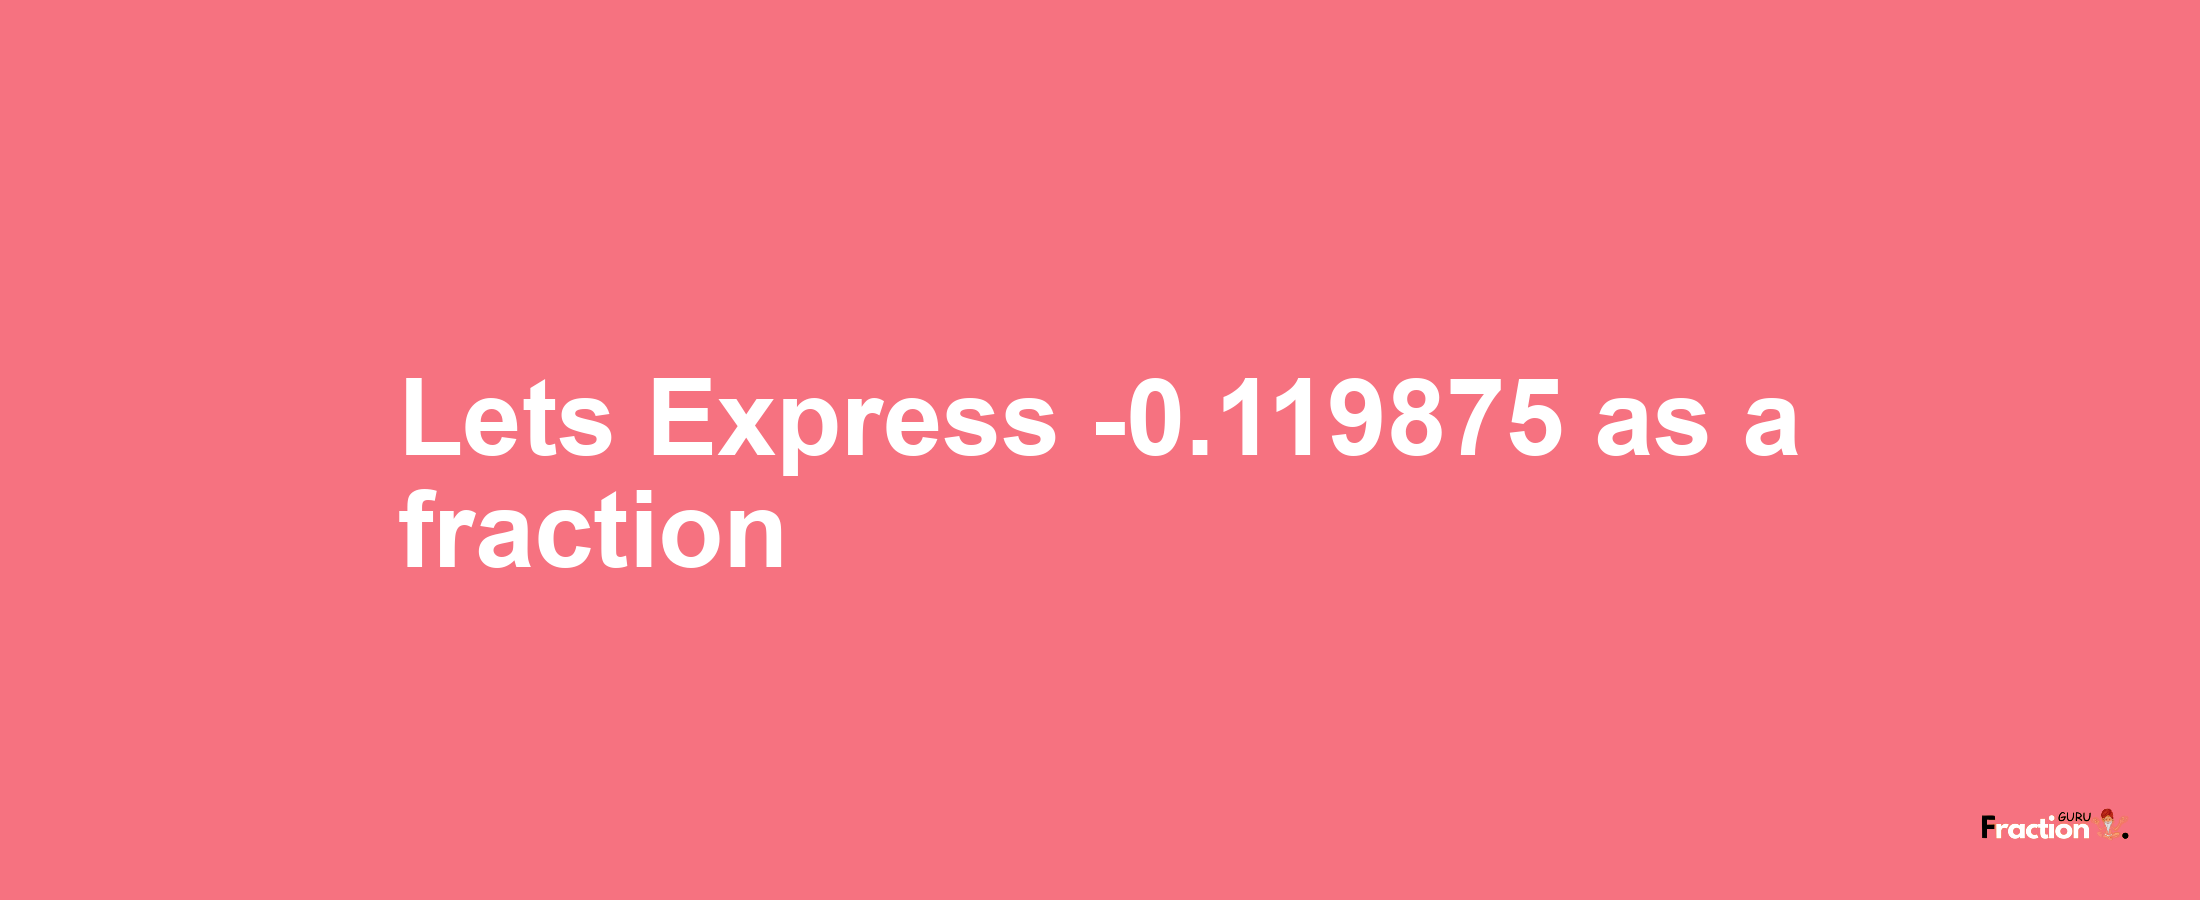 Lets Express -0.119875 as afraction